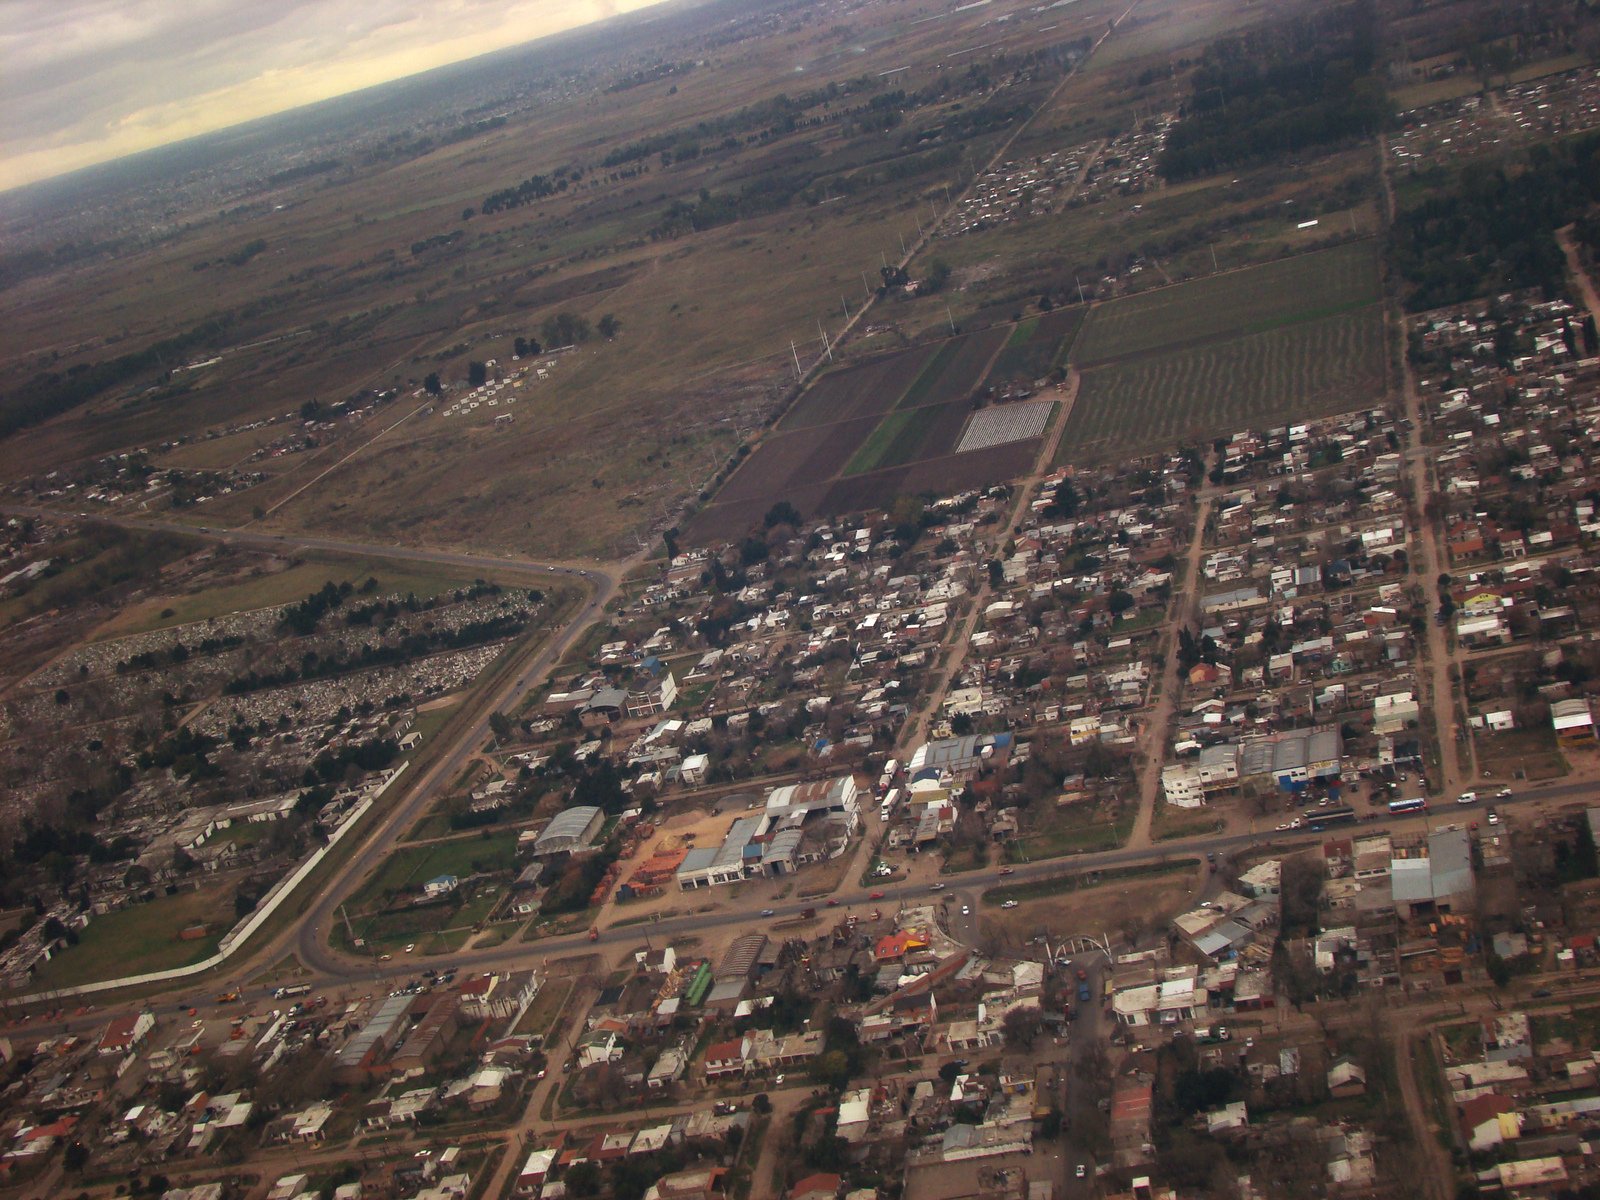 an aerial view of several different buildings in a residential neighborhood